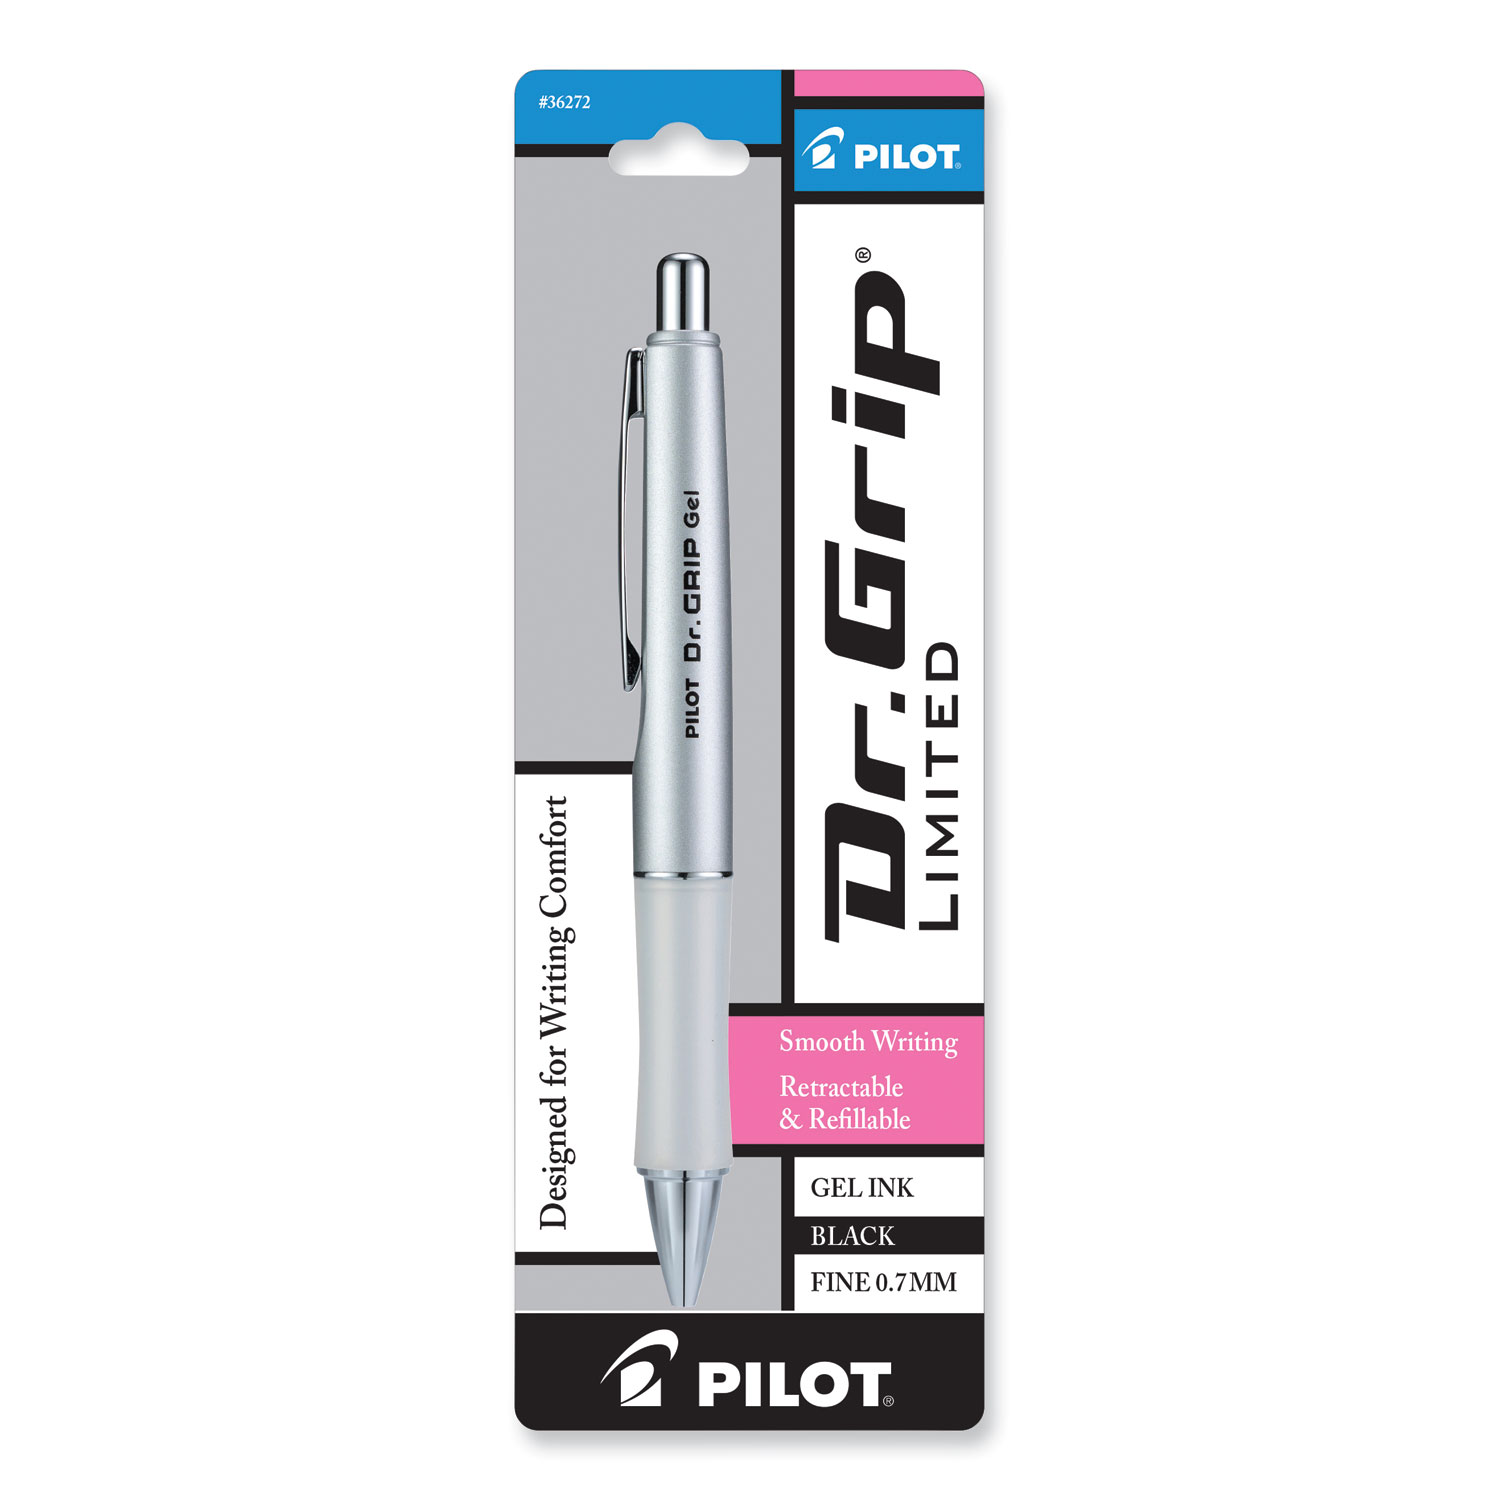 Pilot Refill for Dr. Grip, Easytouch, The Better, B2P and Rex Grip BeGreen Ballpoint  Pens, Fine Conical Tip, Black Ink, 2/Pack